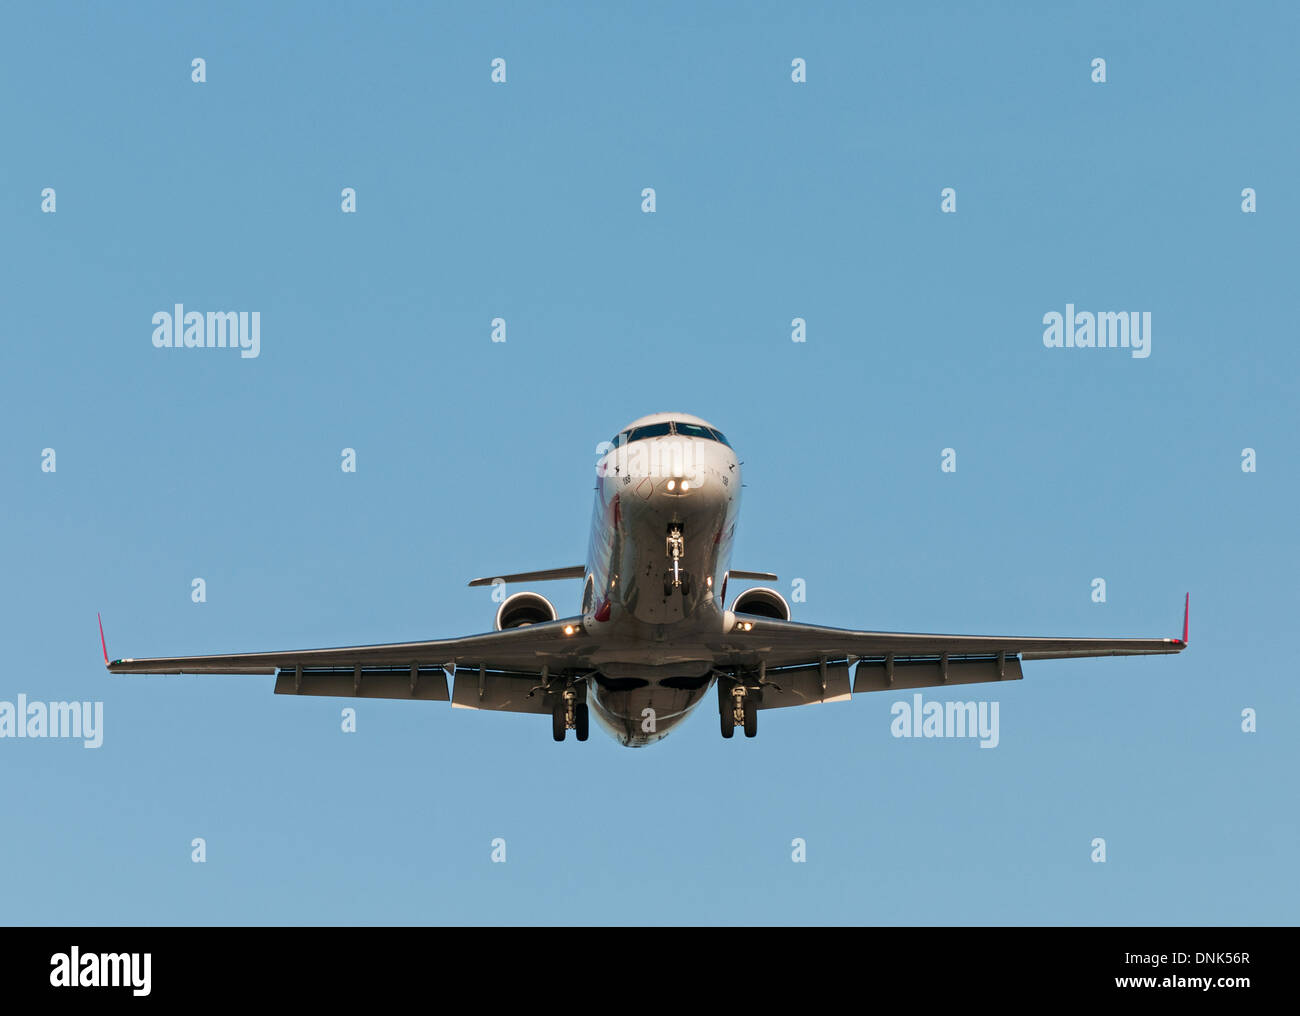 low angle head on view of a Bombardier CRJ-200LR regional airliner on final approach for landing. Stock Photo